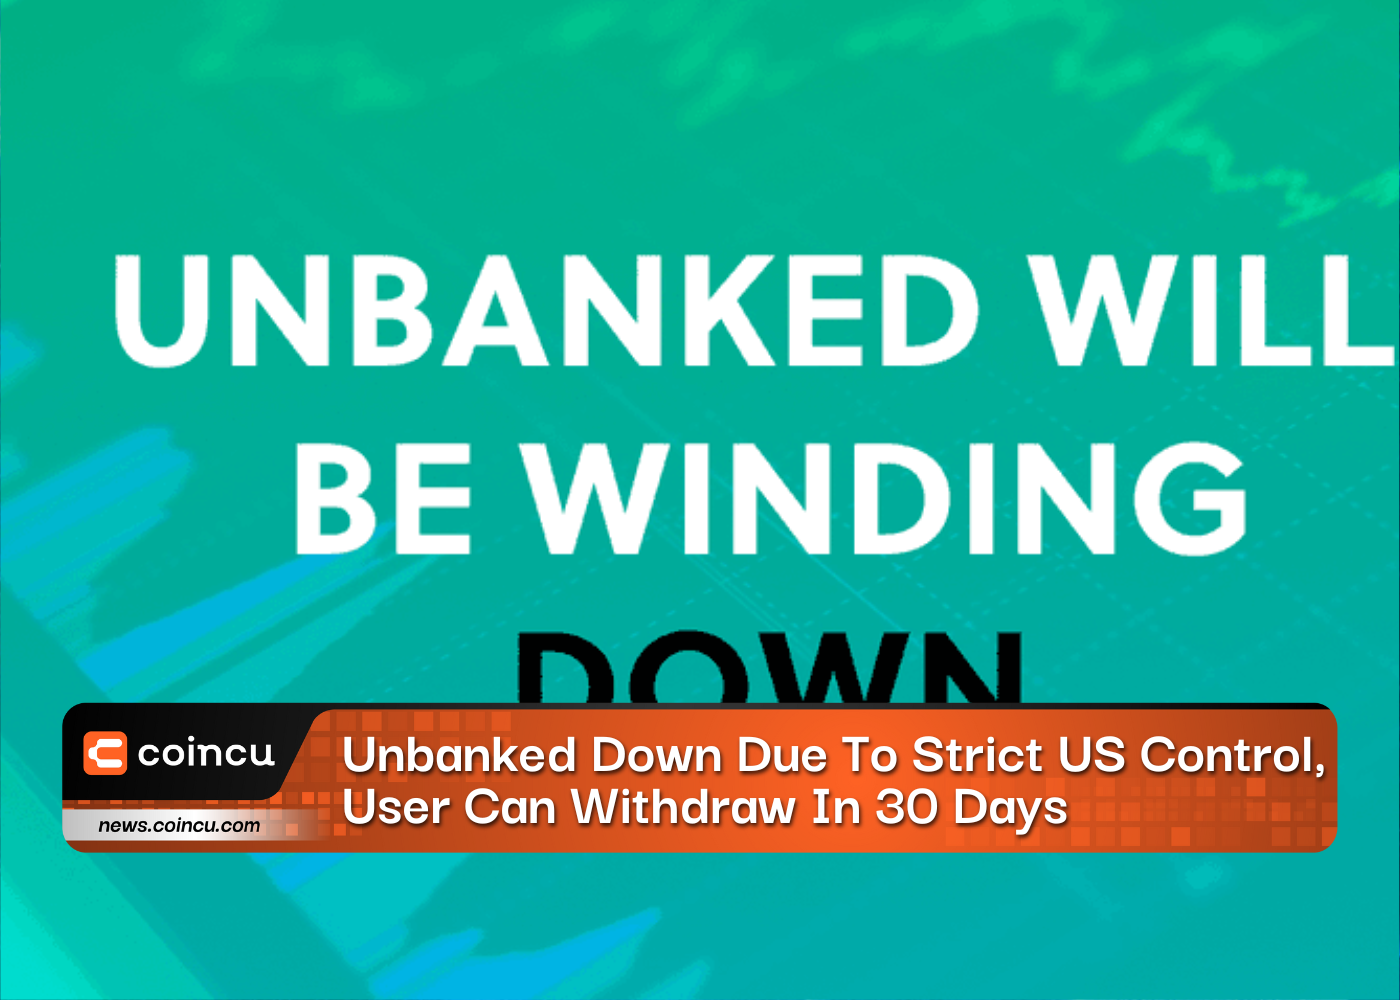 Unbanked Down Due To Strict US Control, User Can Withdraw In 30 Days